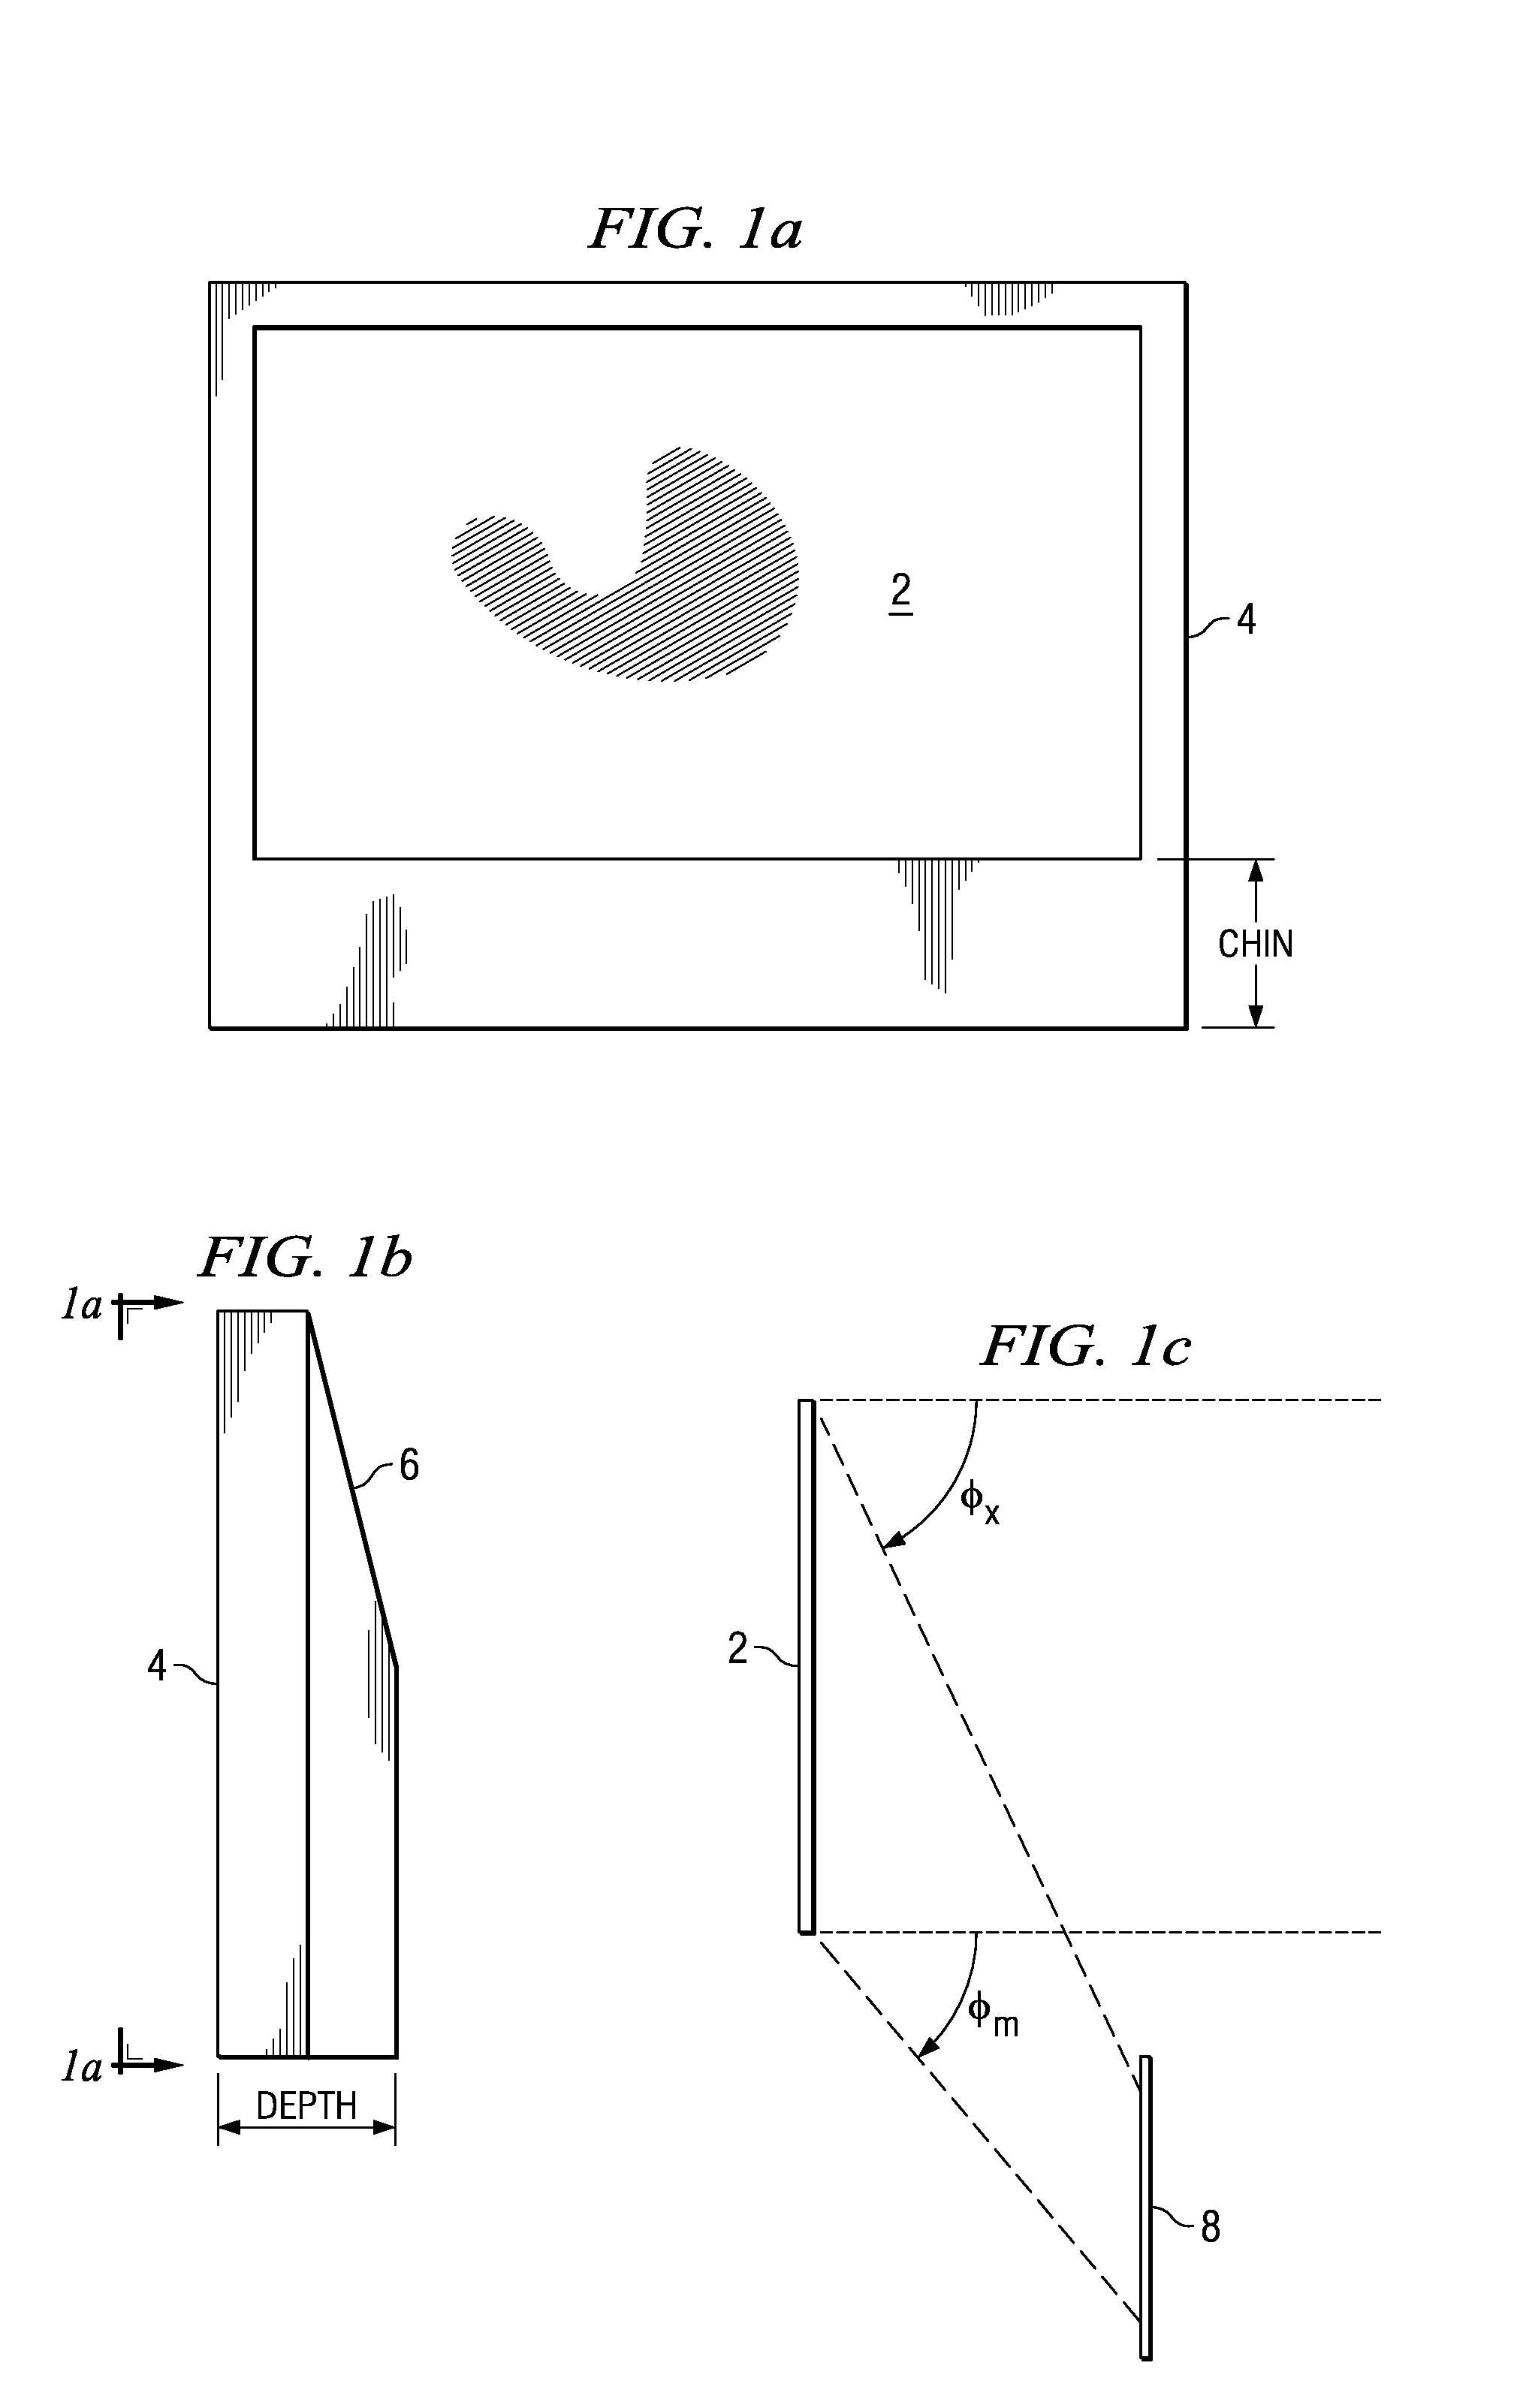 Optical System for a Thin, Low-Chin, Projection Television